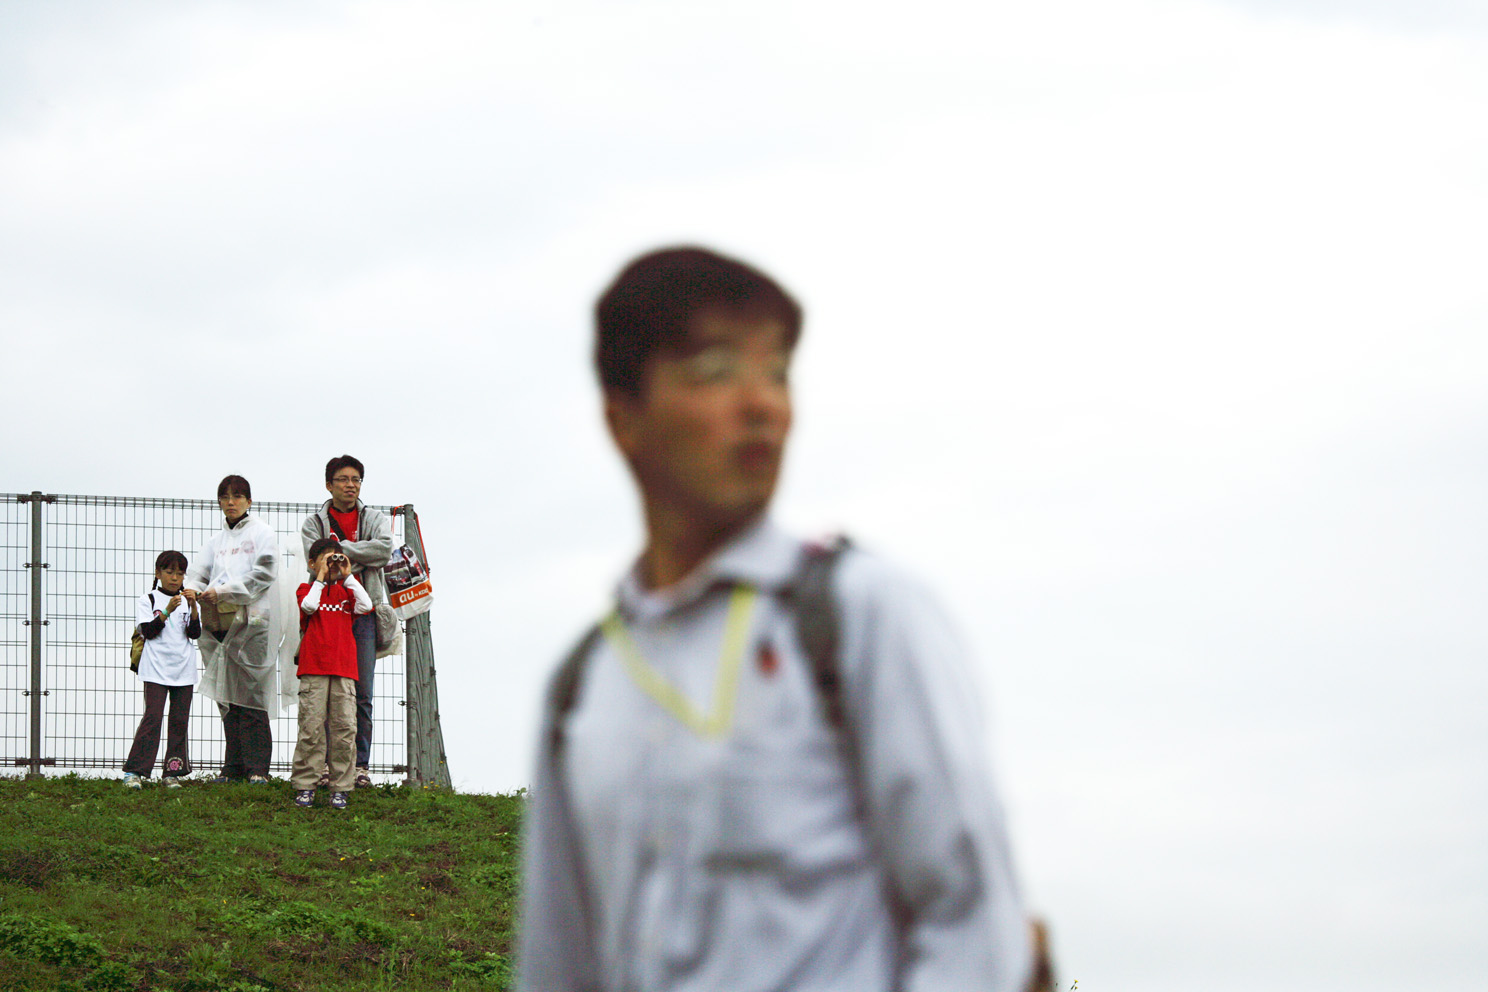 Fans at the Japanese Grand Prix